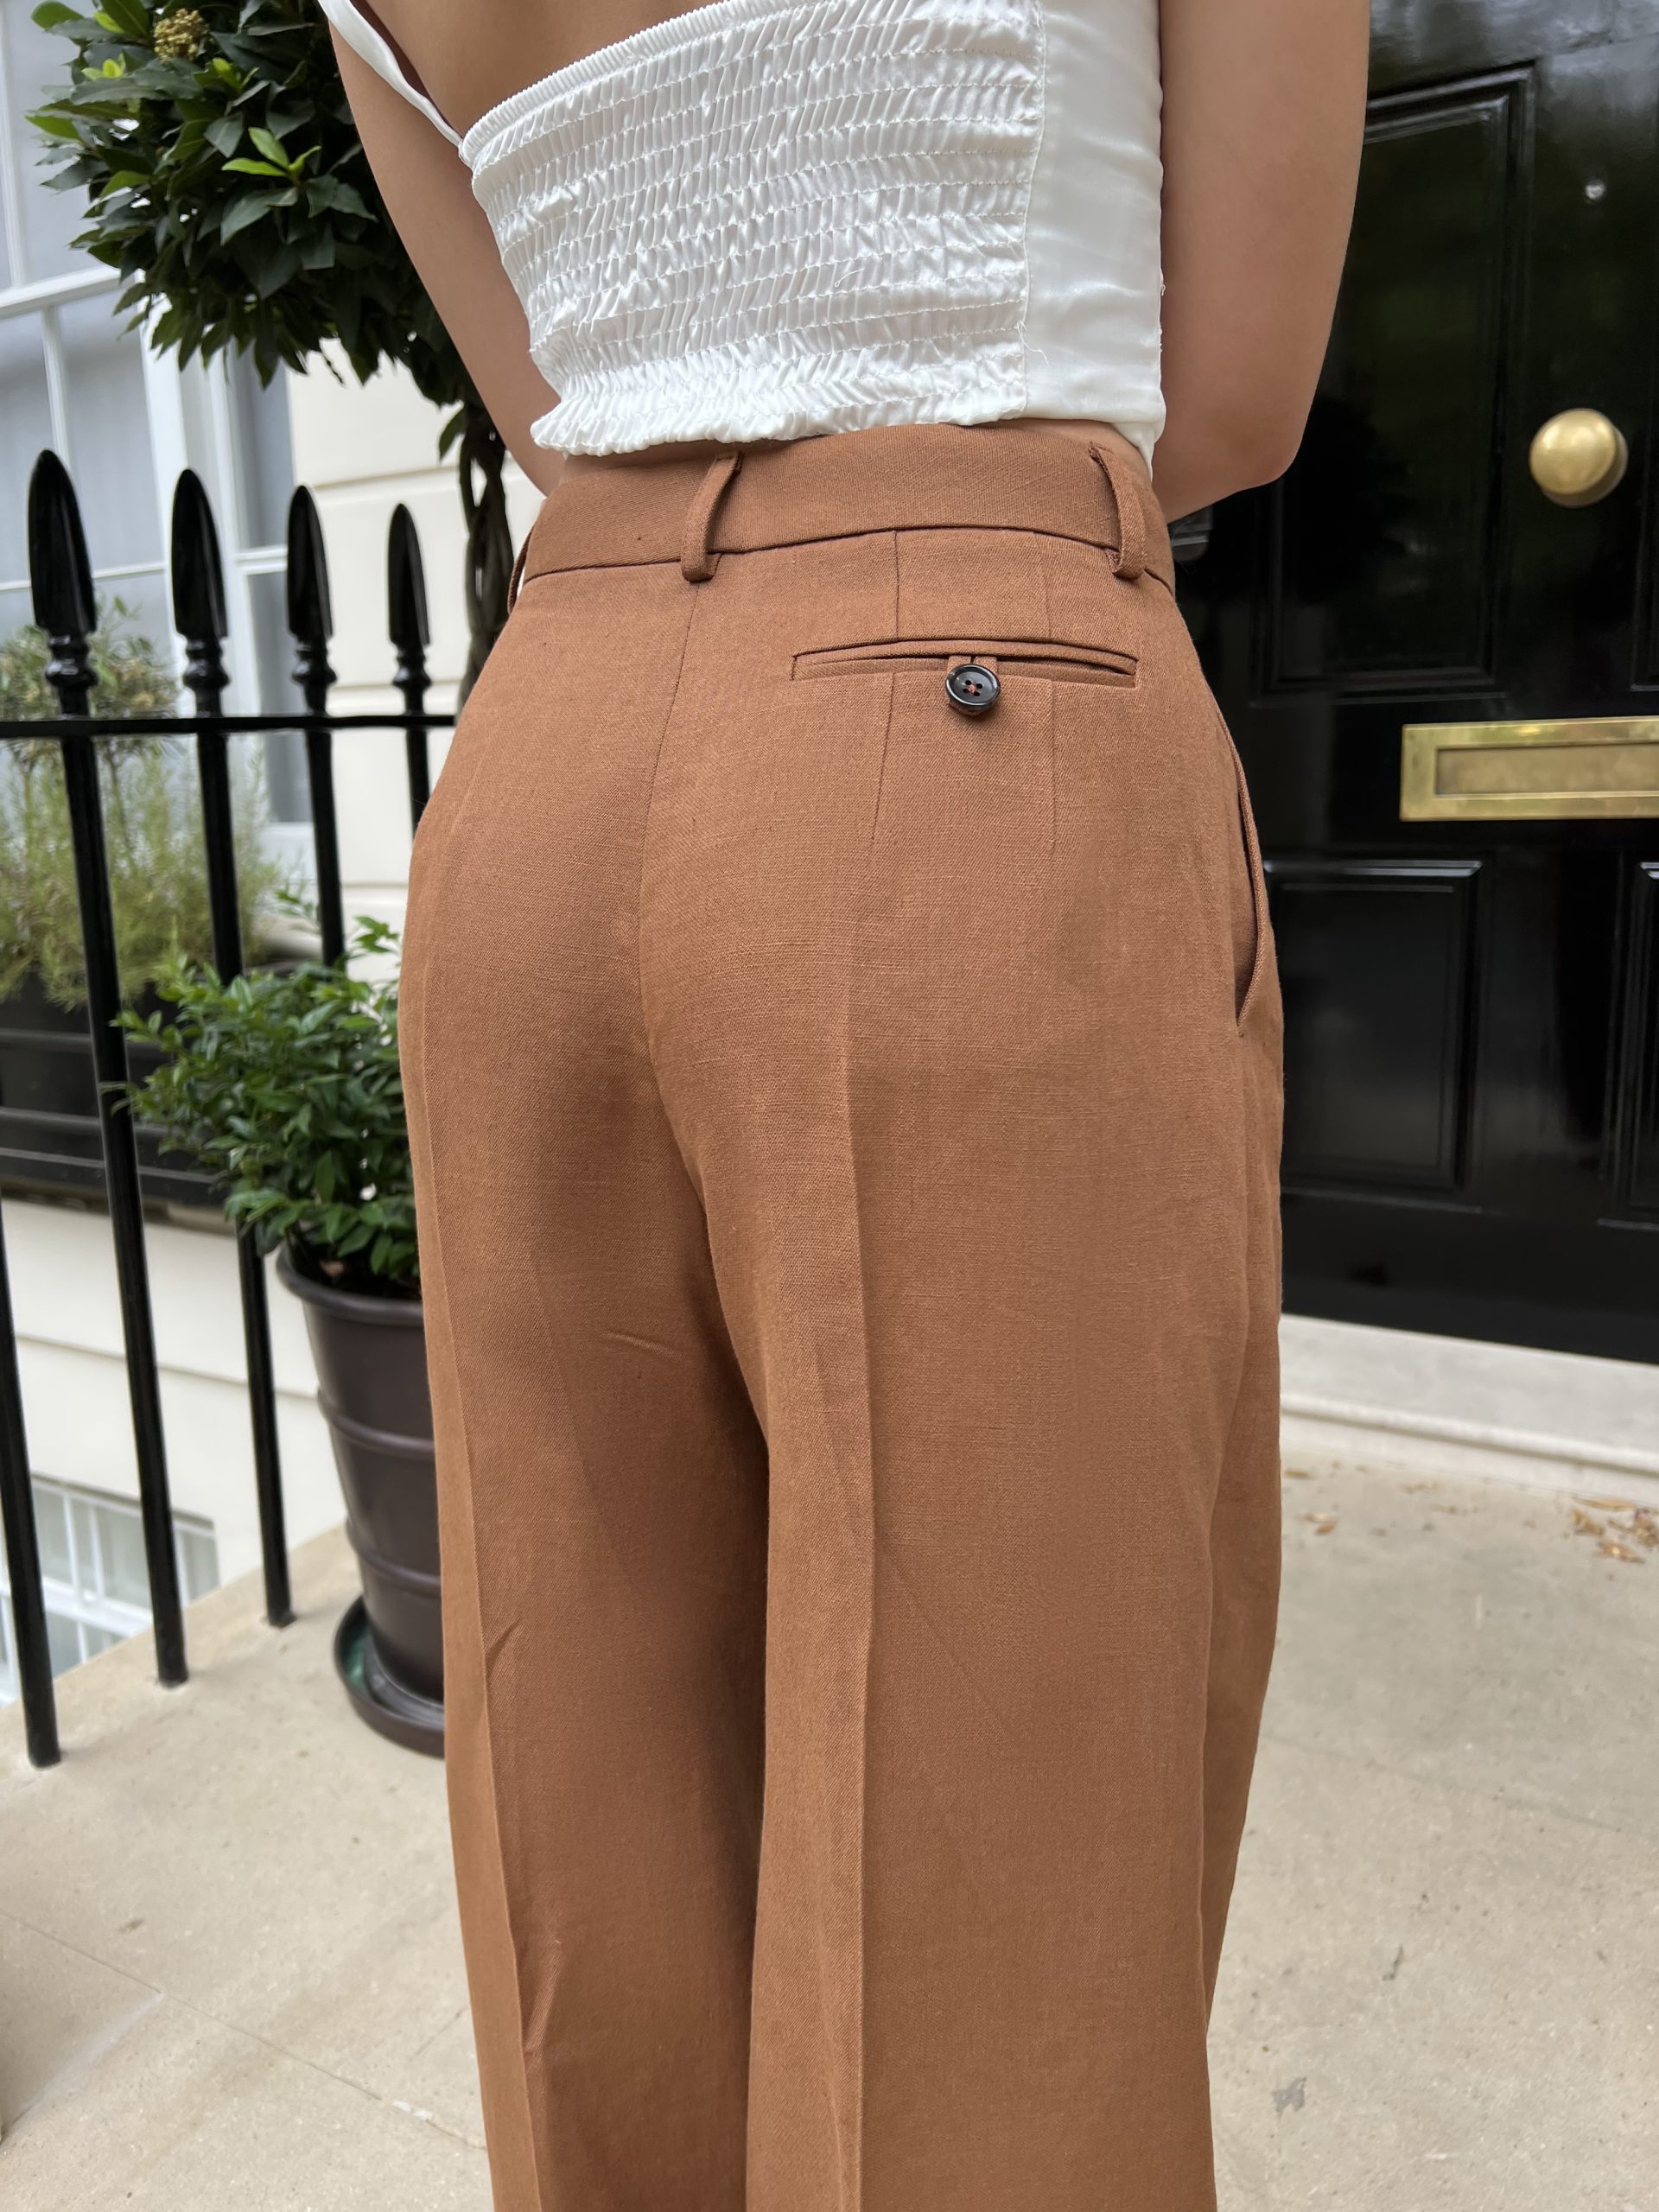 Trending: Trouser Sewing Patterns - The Fold Line